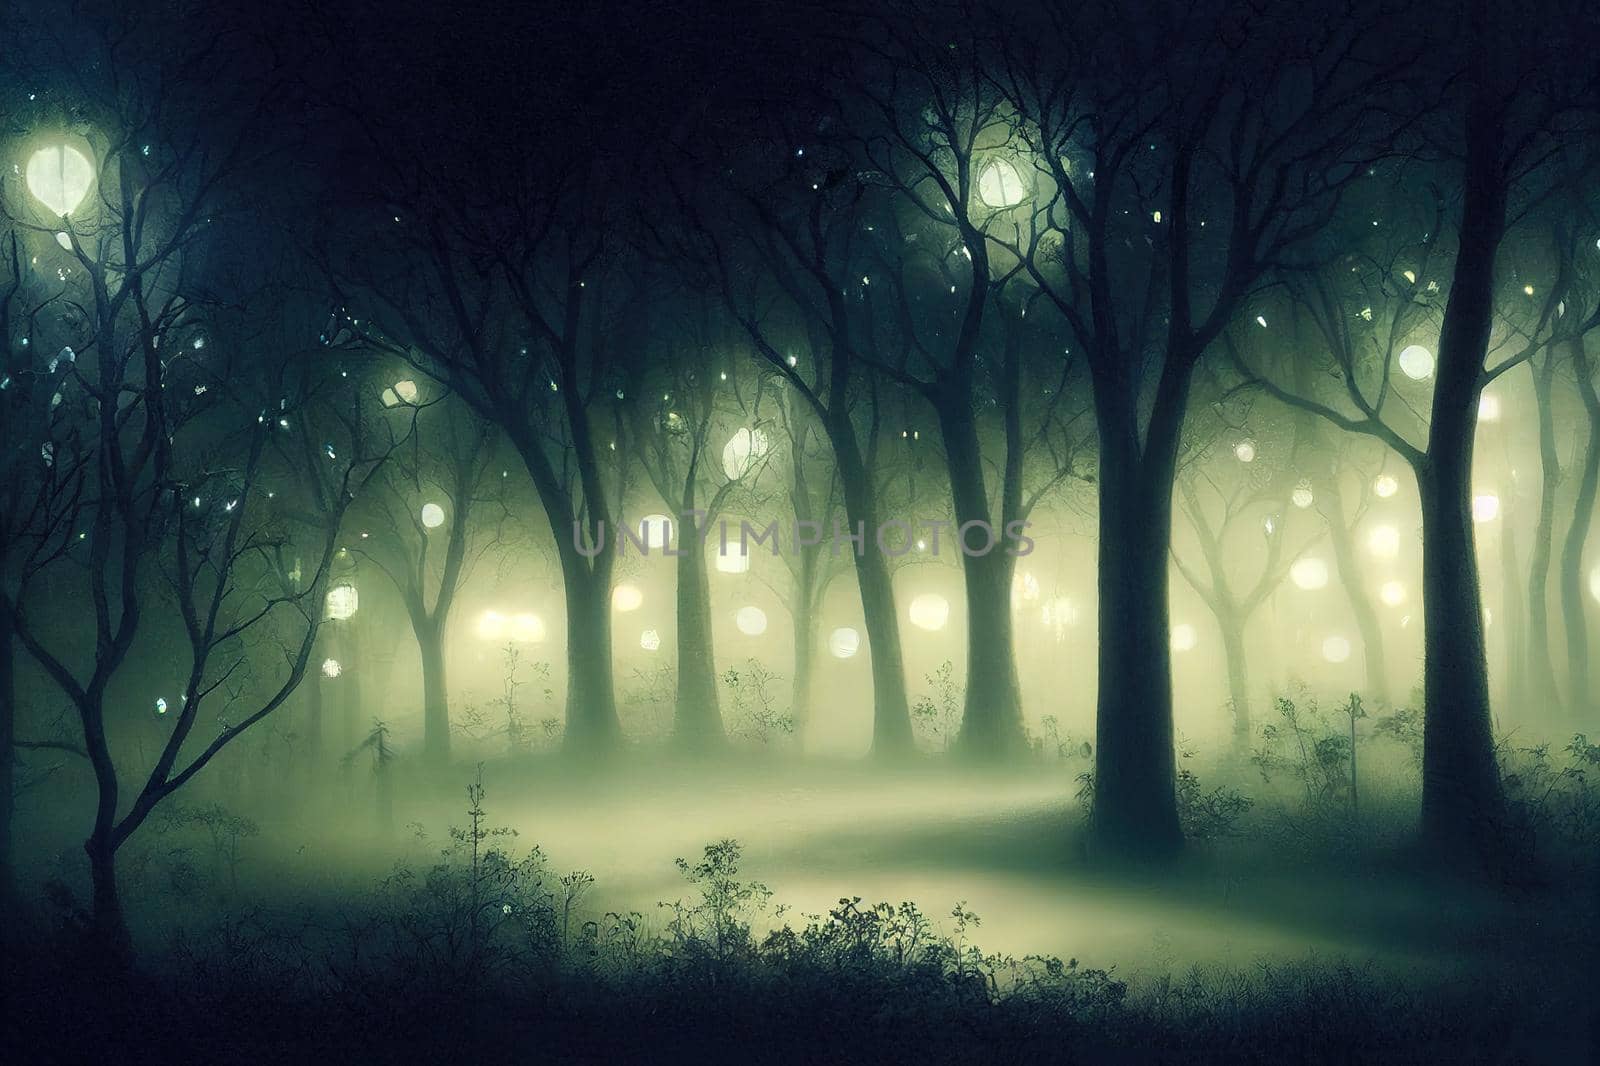 Enchanted garden night time scene with mist by 2ragon